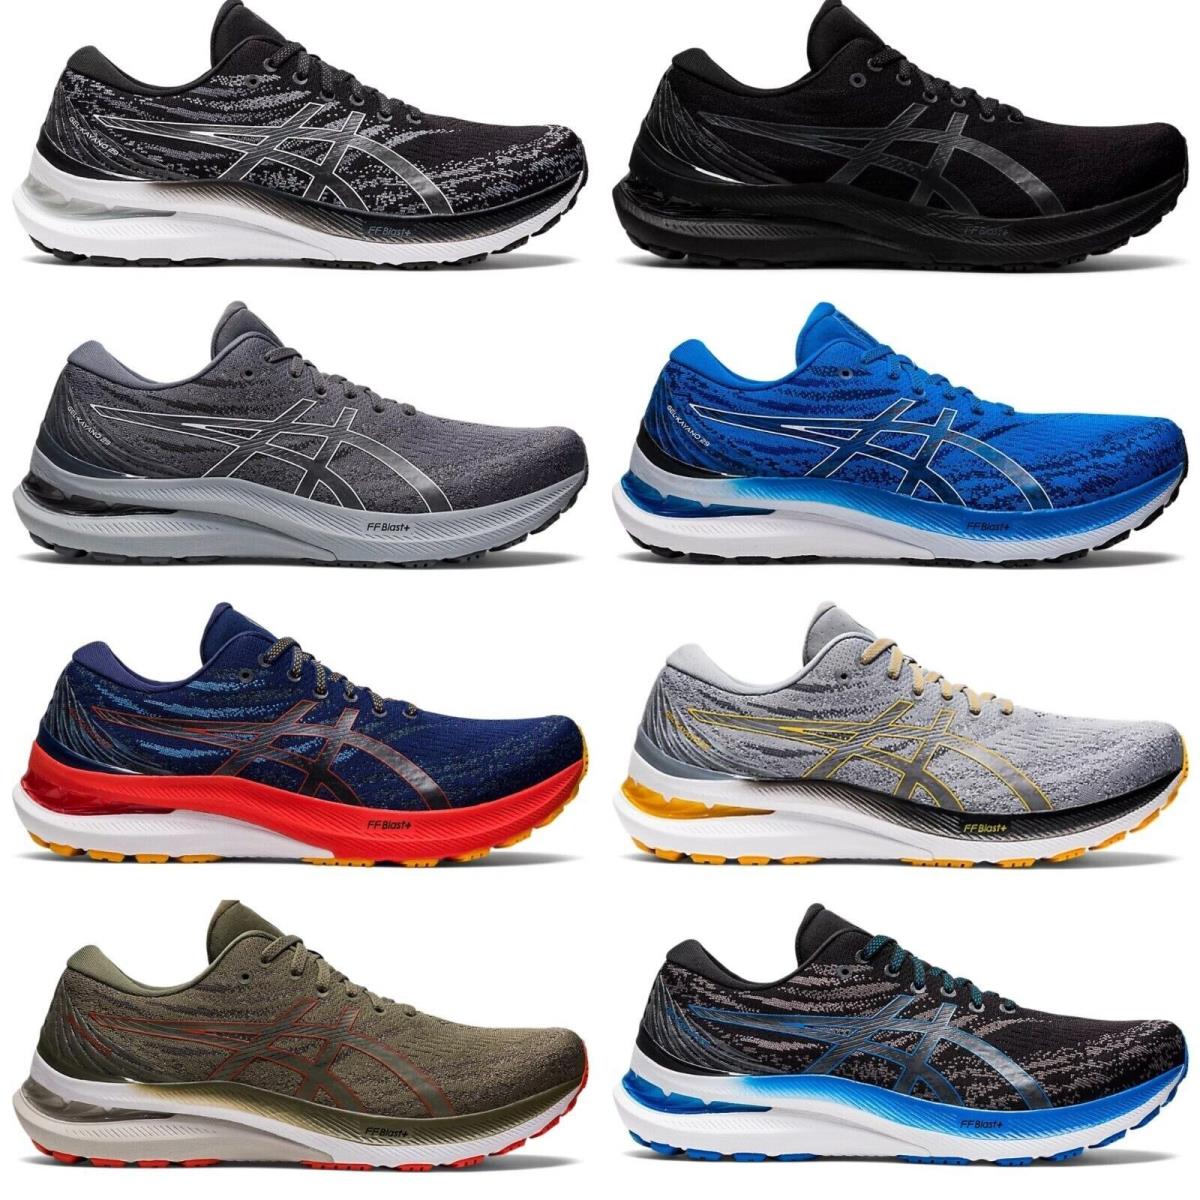 Men`s Asics Gel-kayano 29 Running Shoes All Colors US Sizes 7-14